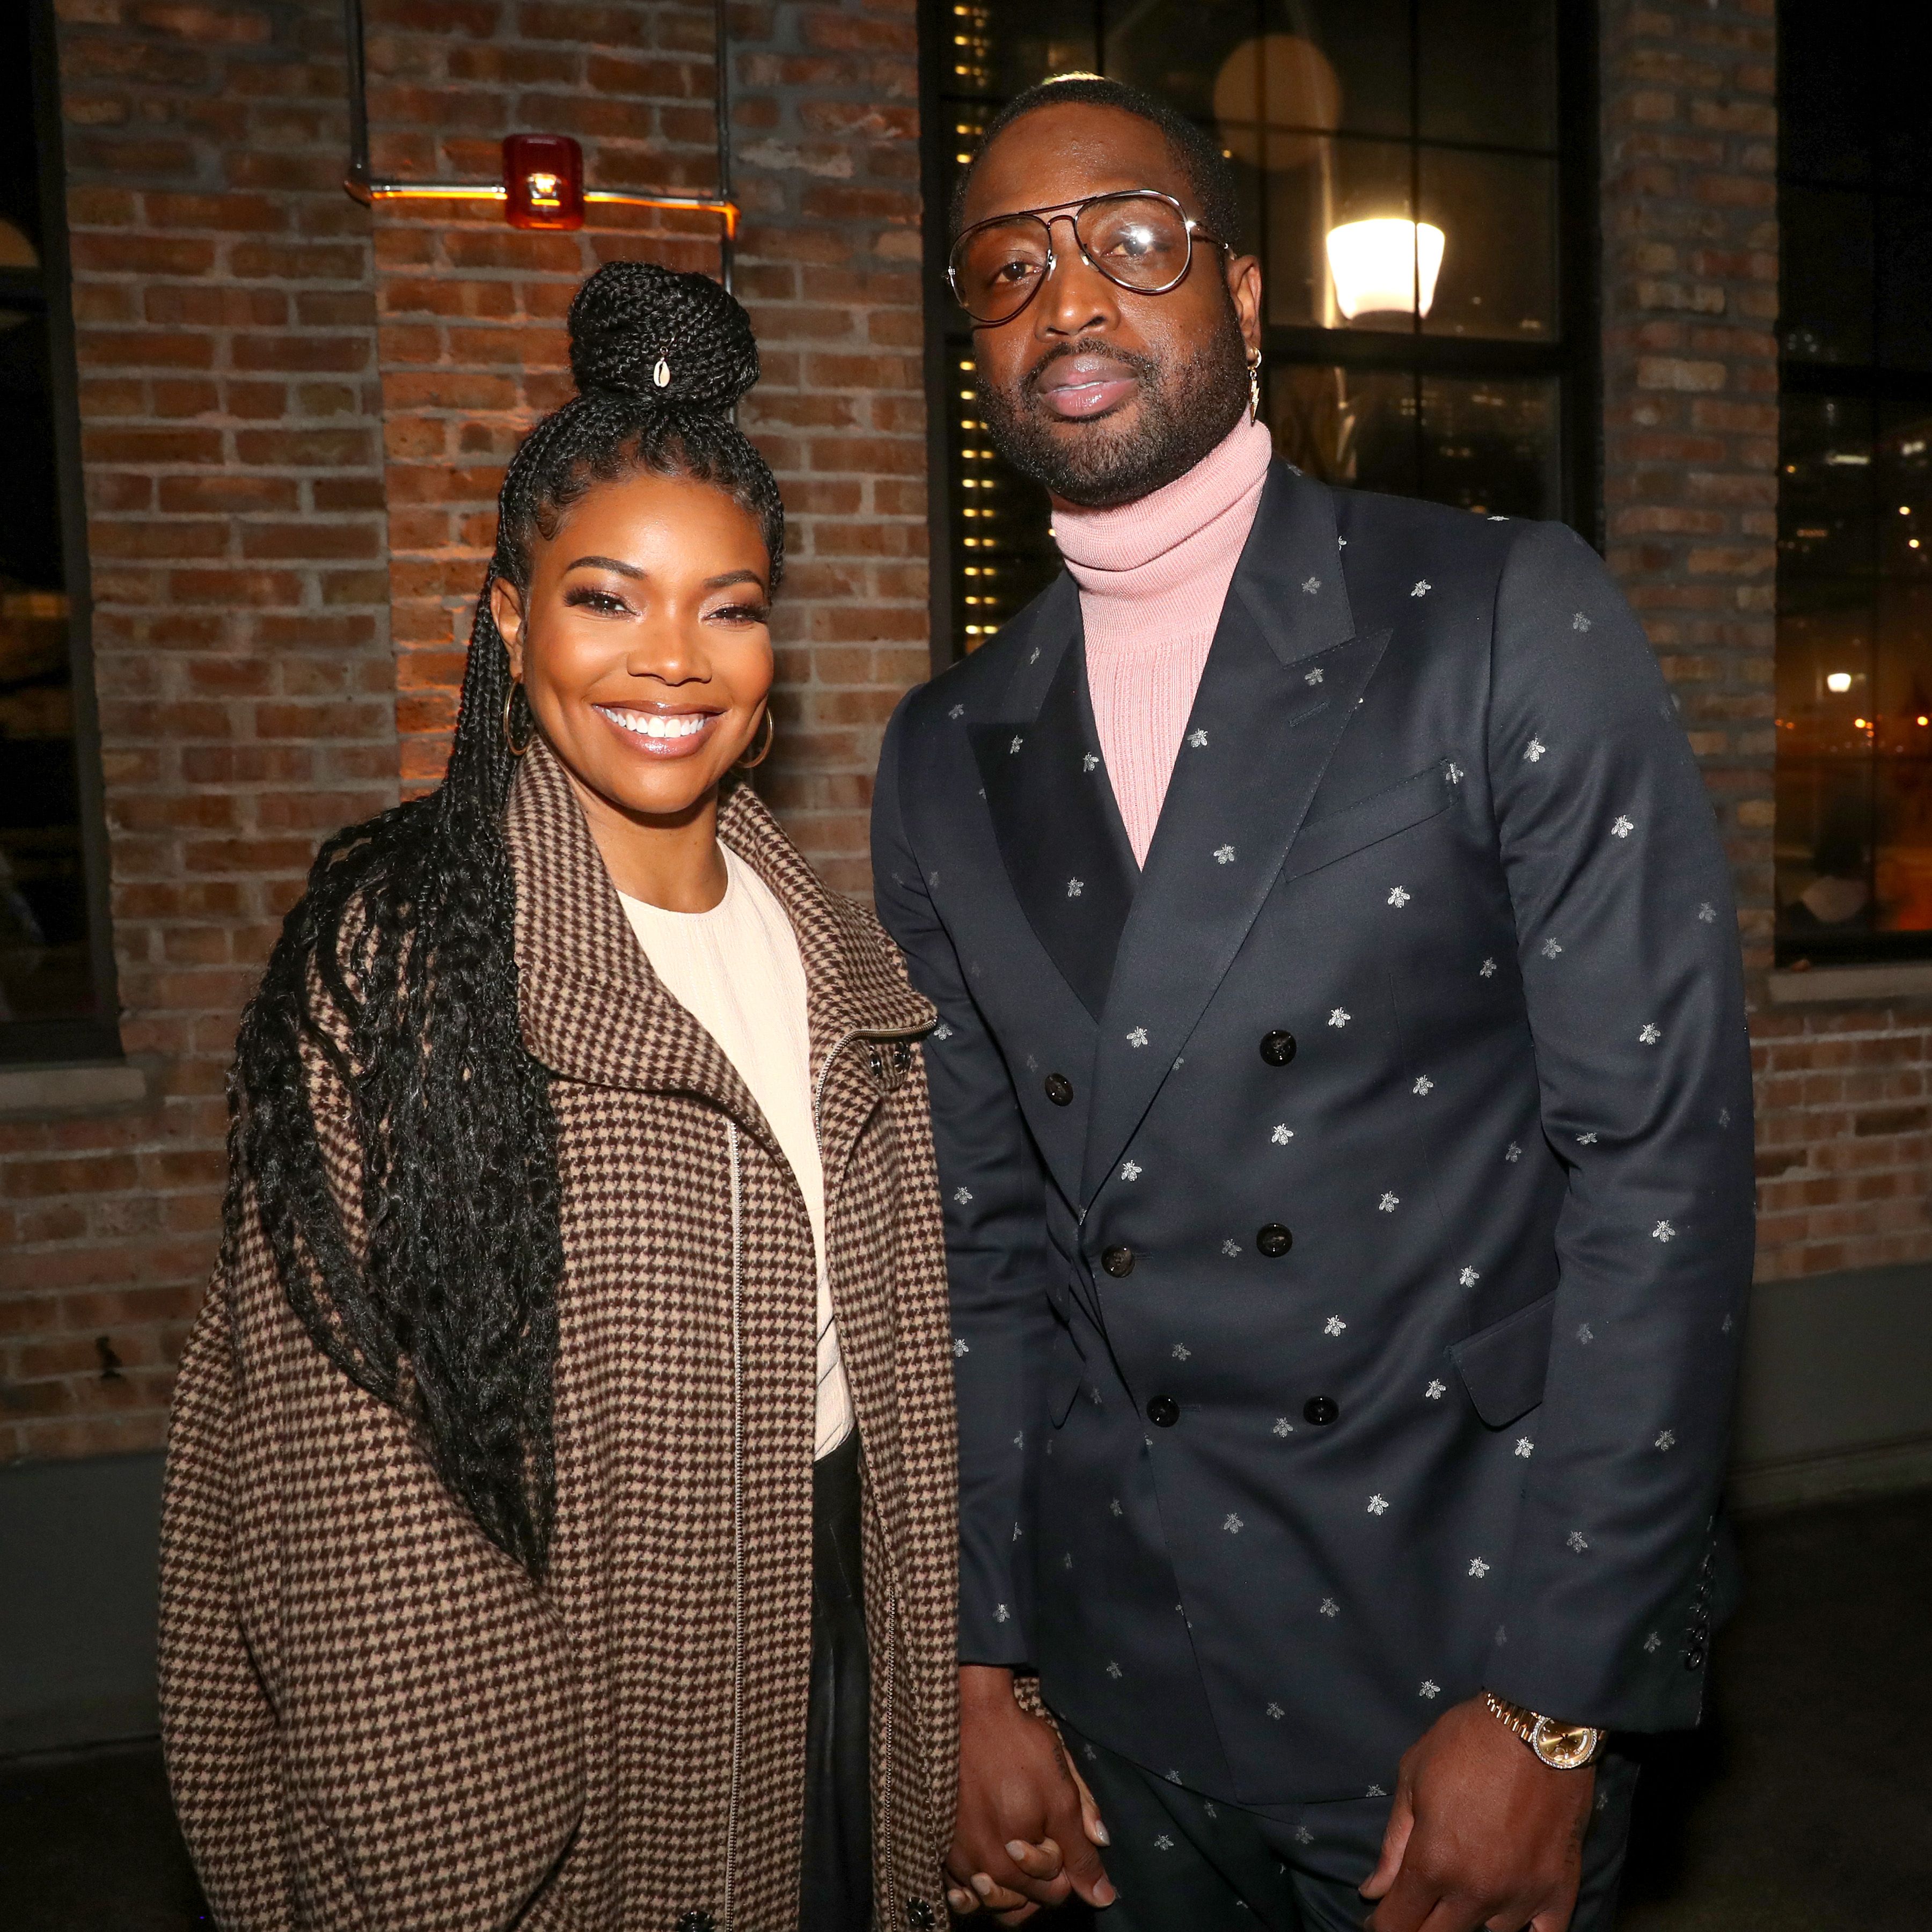 Gabrielle Union and Dwyane Wade during "Stance Spades At NBA All-Star 2020" at City Hall on February 15, 2020 in Chicago, Illinois. | Source: Getty Images